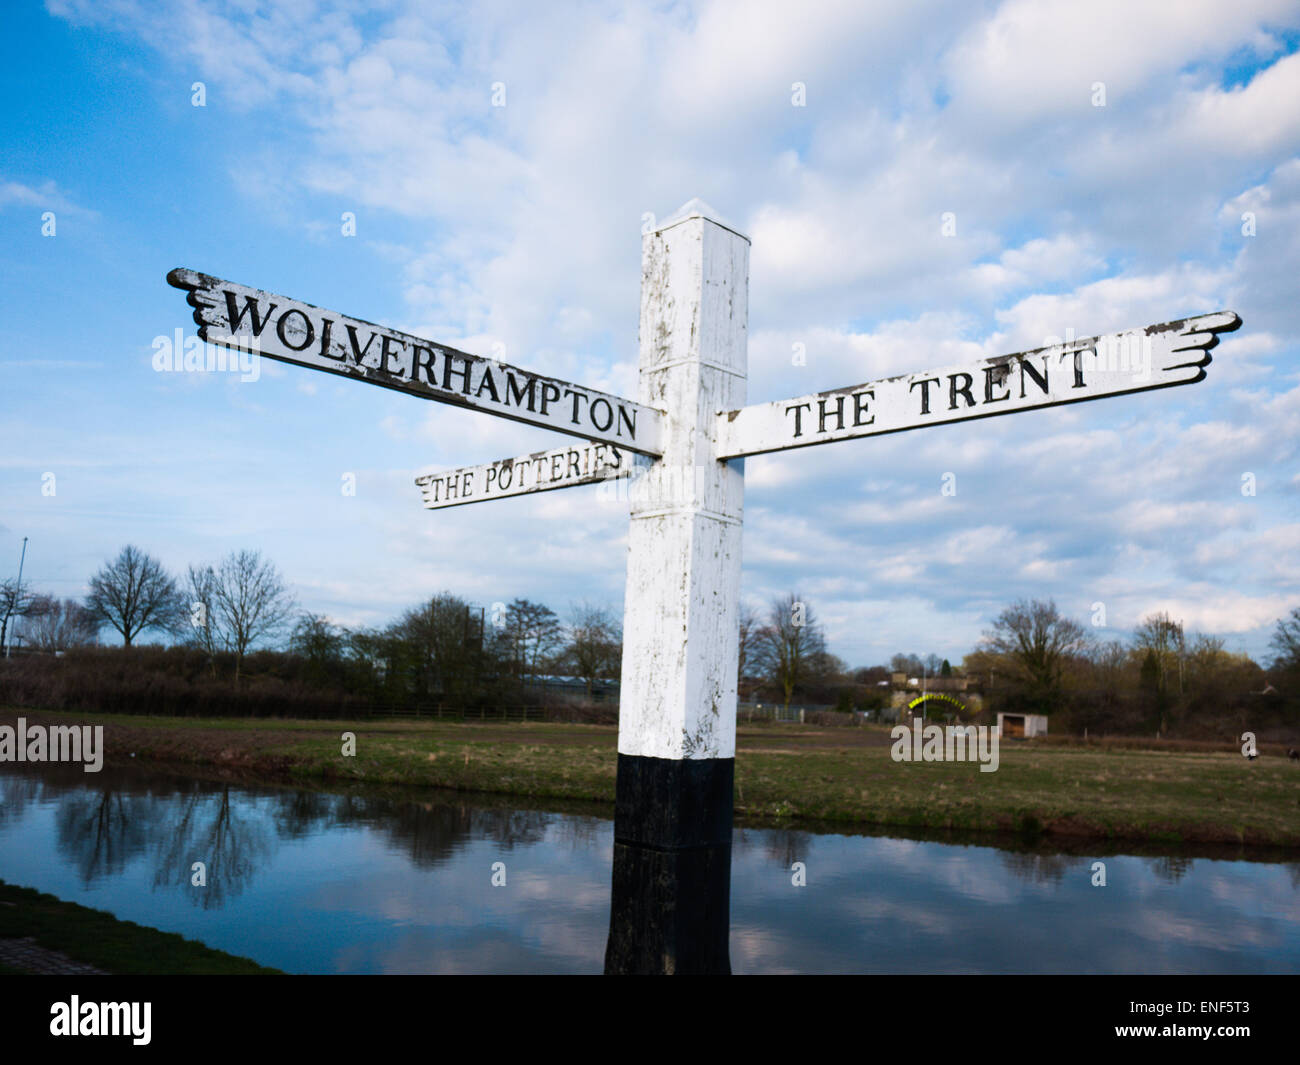 Wooden direction signpost to the Potteries, Wolverhampton and the Trent Stock Photo